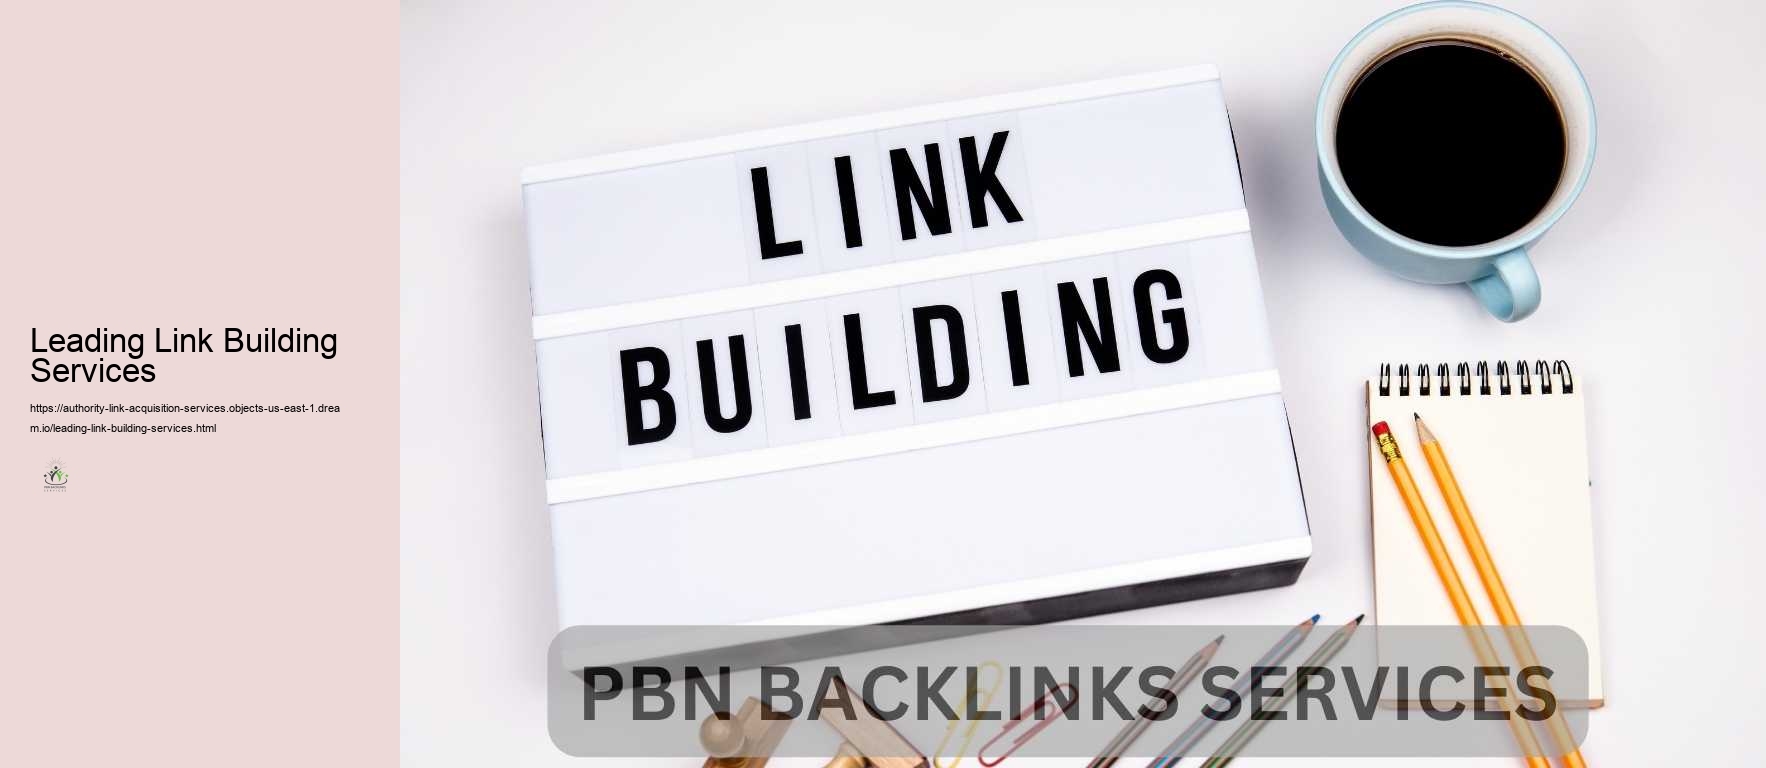 Leading Link Building Services